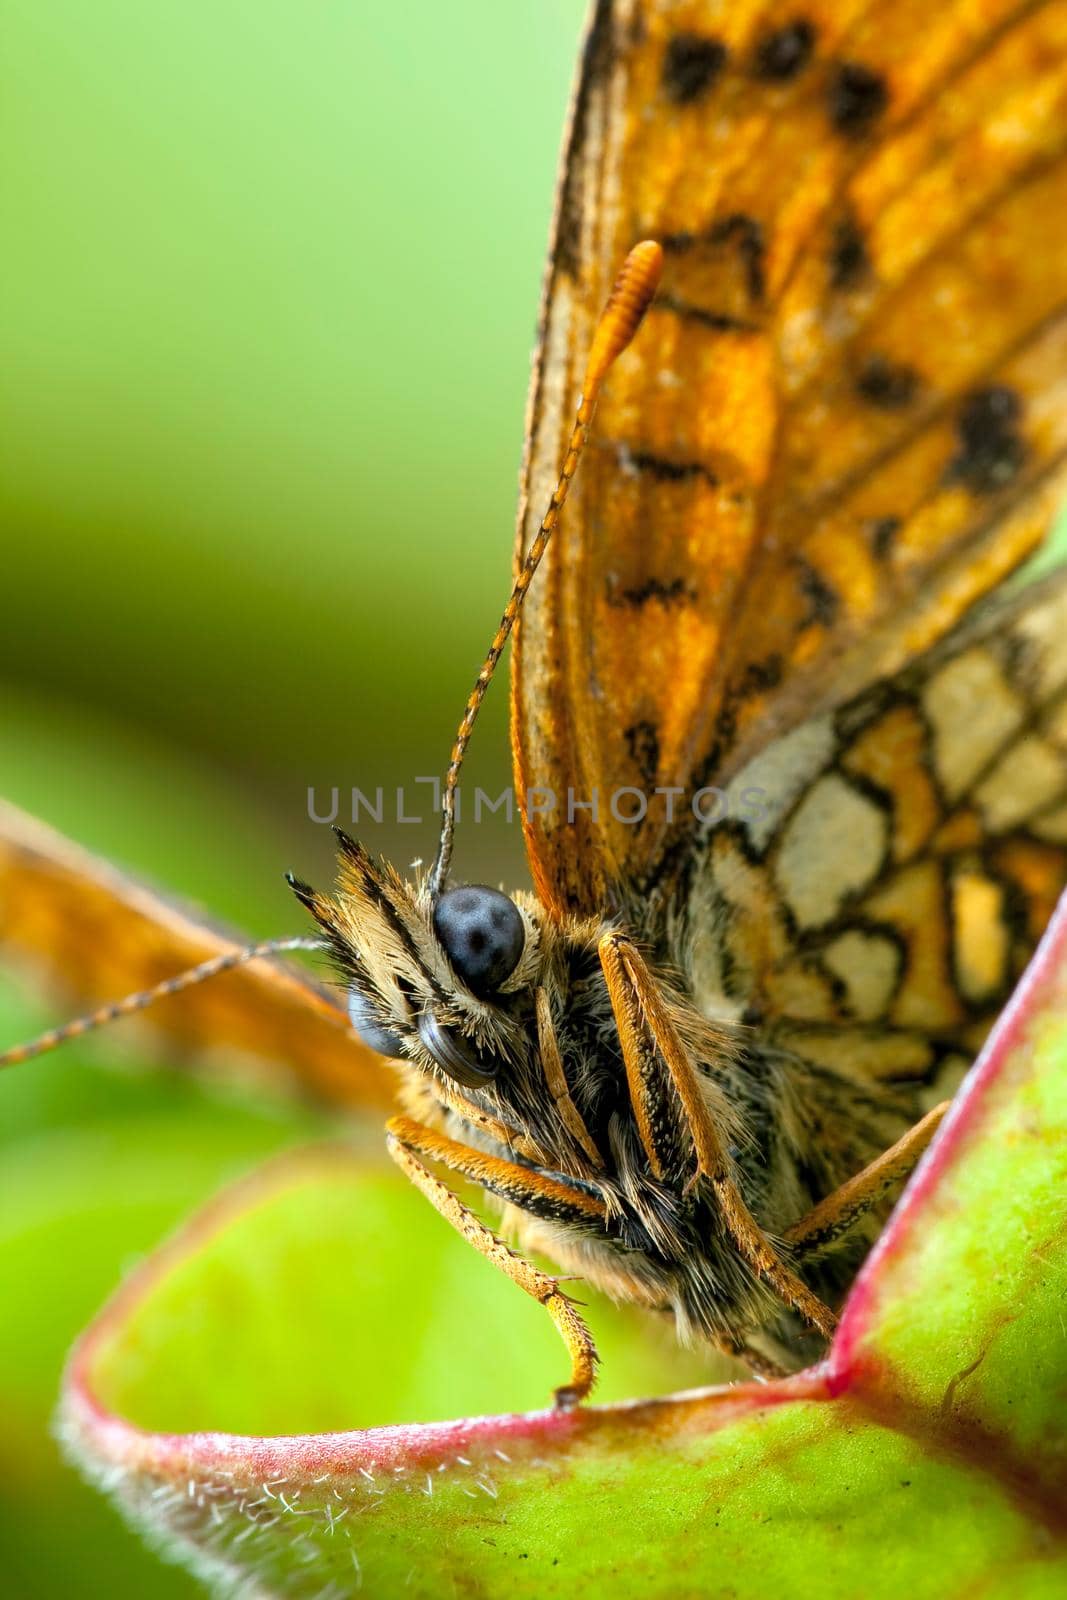 Hairy night butterfly portrait with orange colored wings on carnivorous plant gree leaf